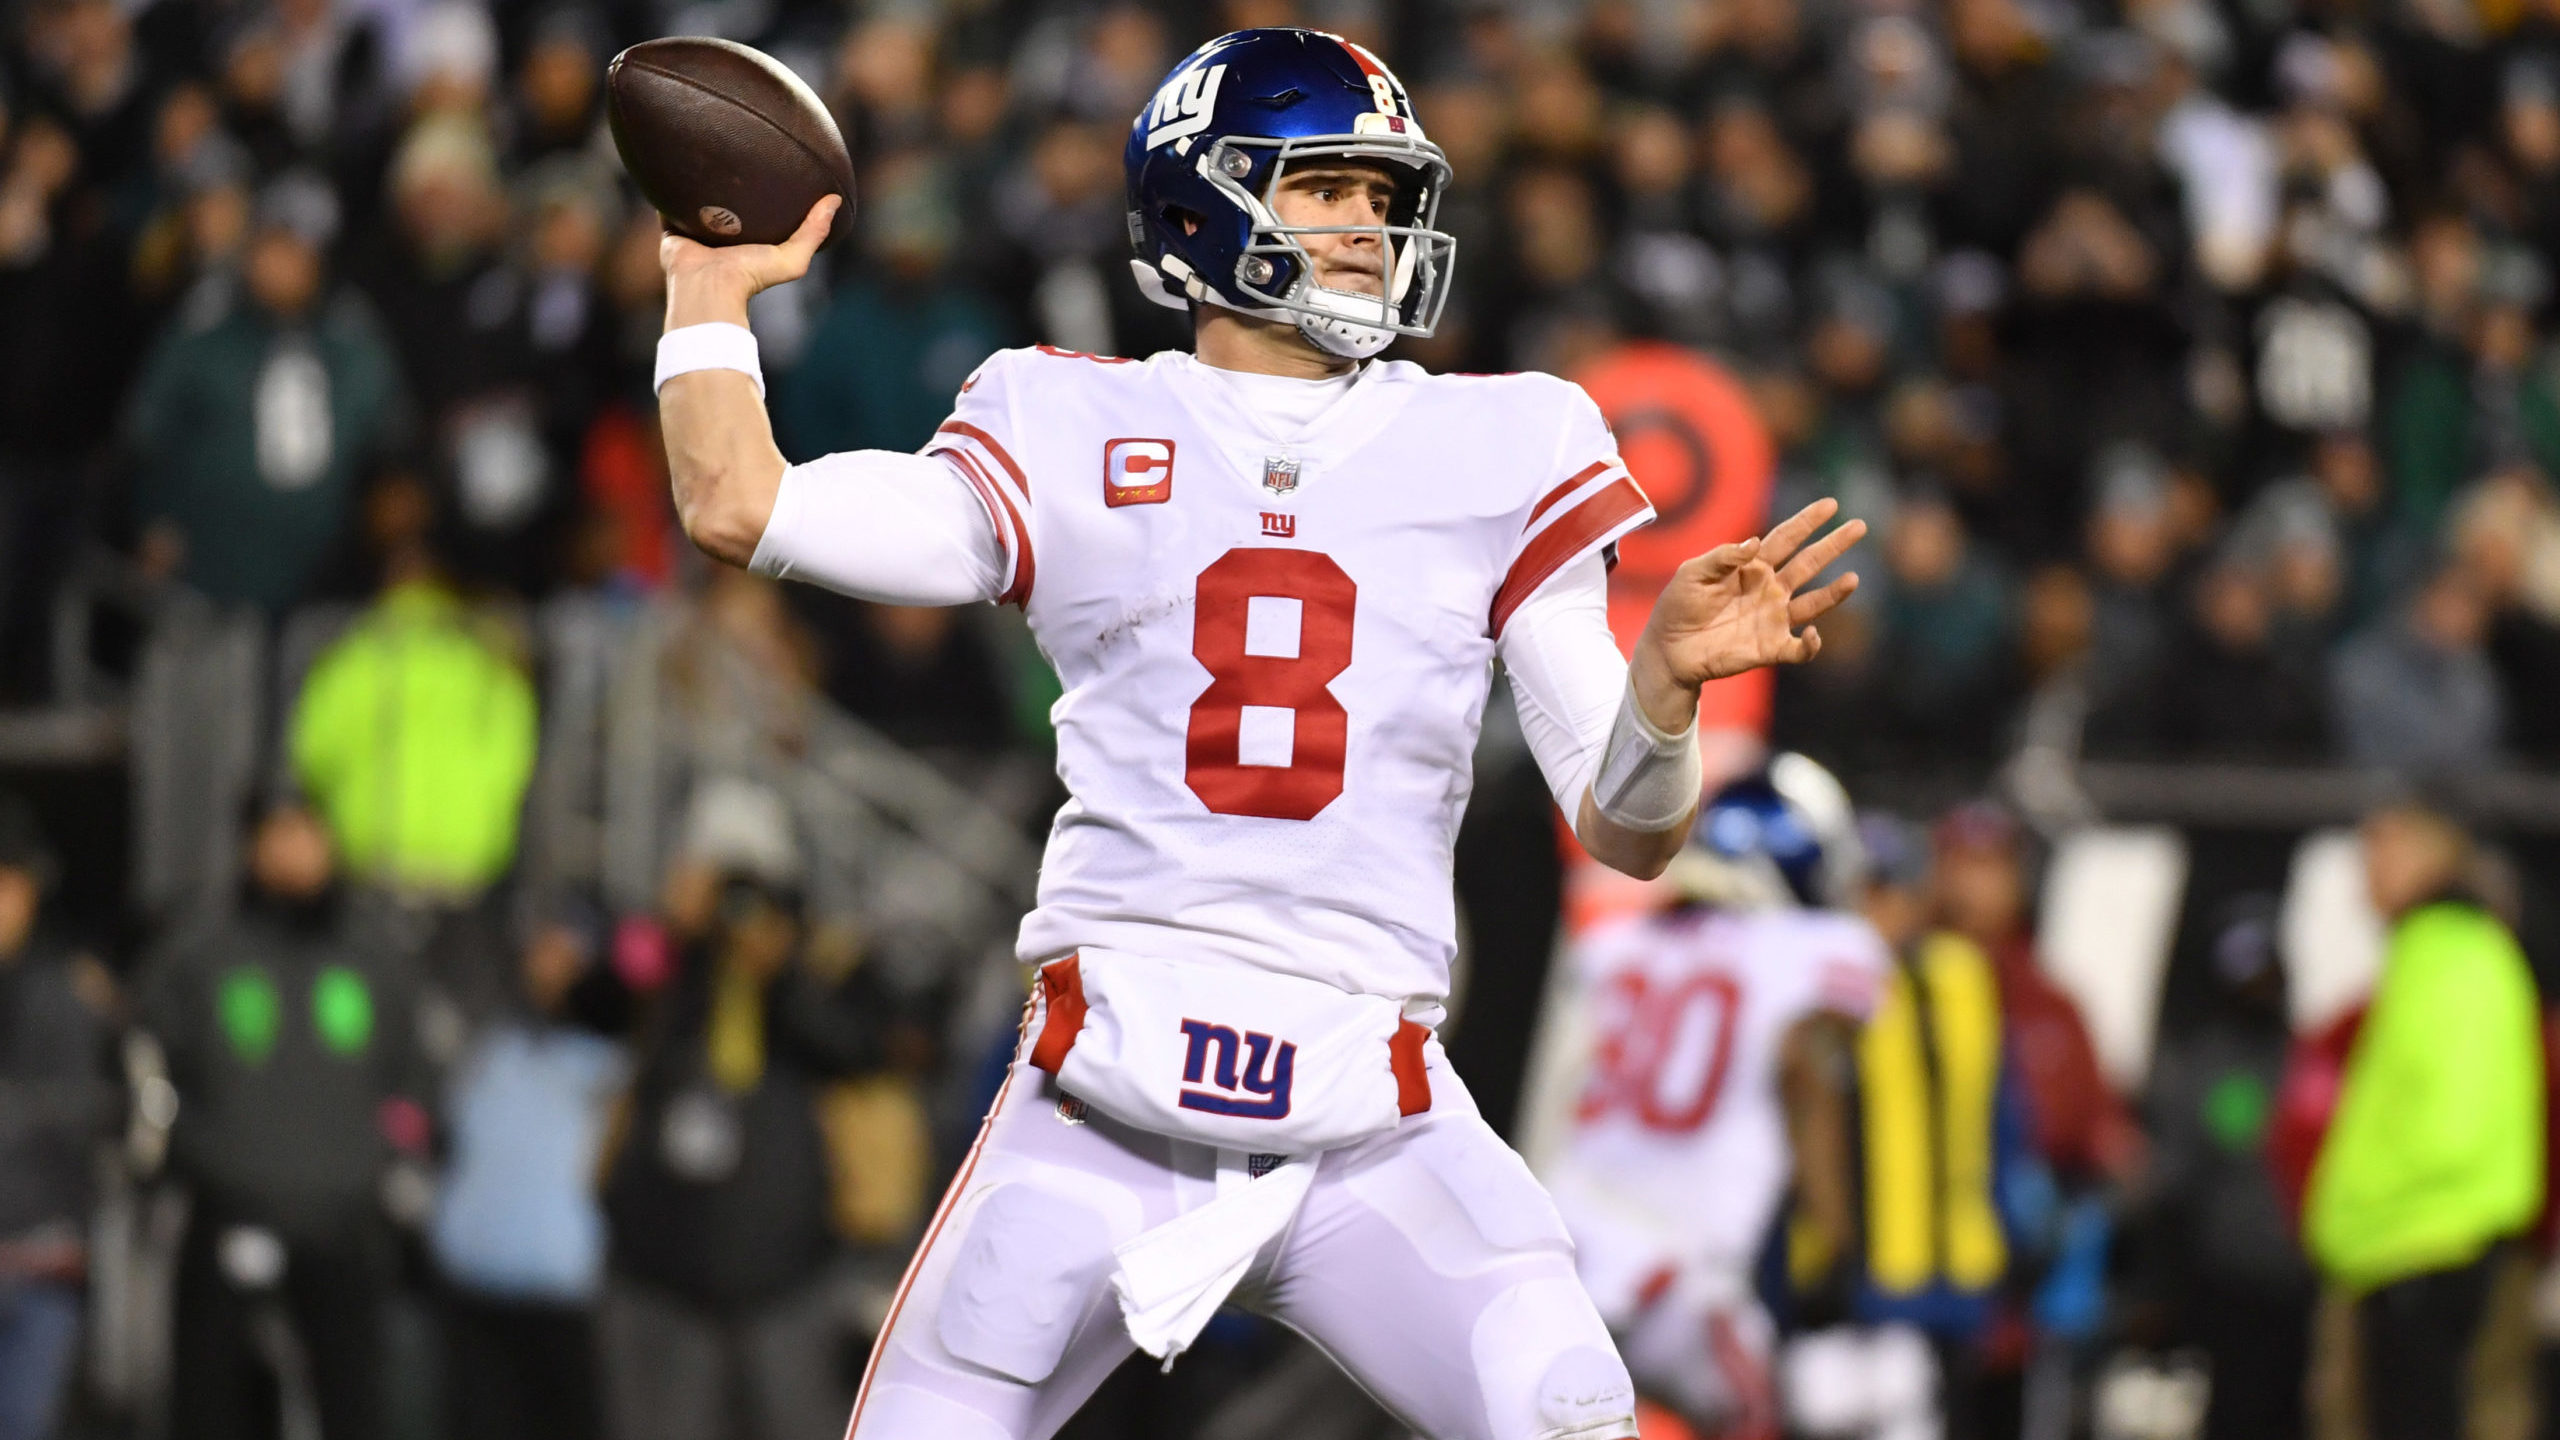 Giants Exceeded Expectations but Couldn’t Match Eagles’ Talent